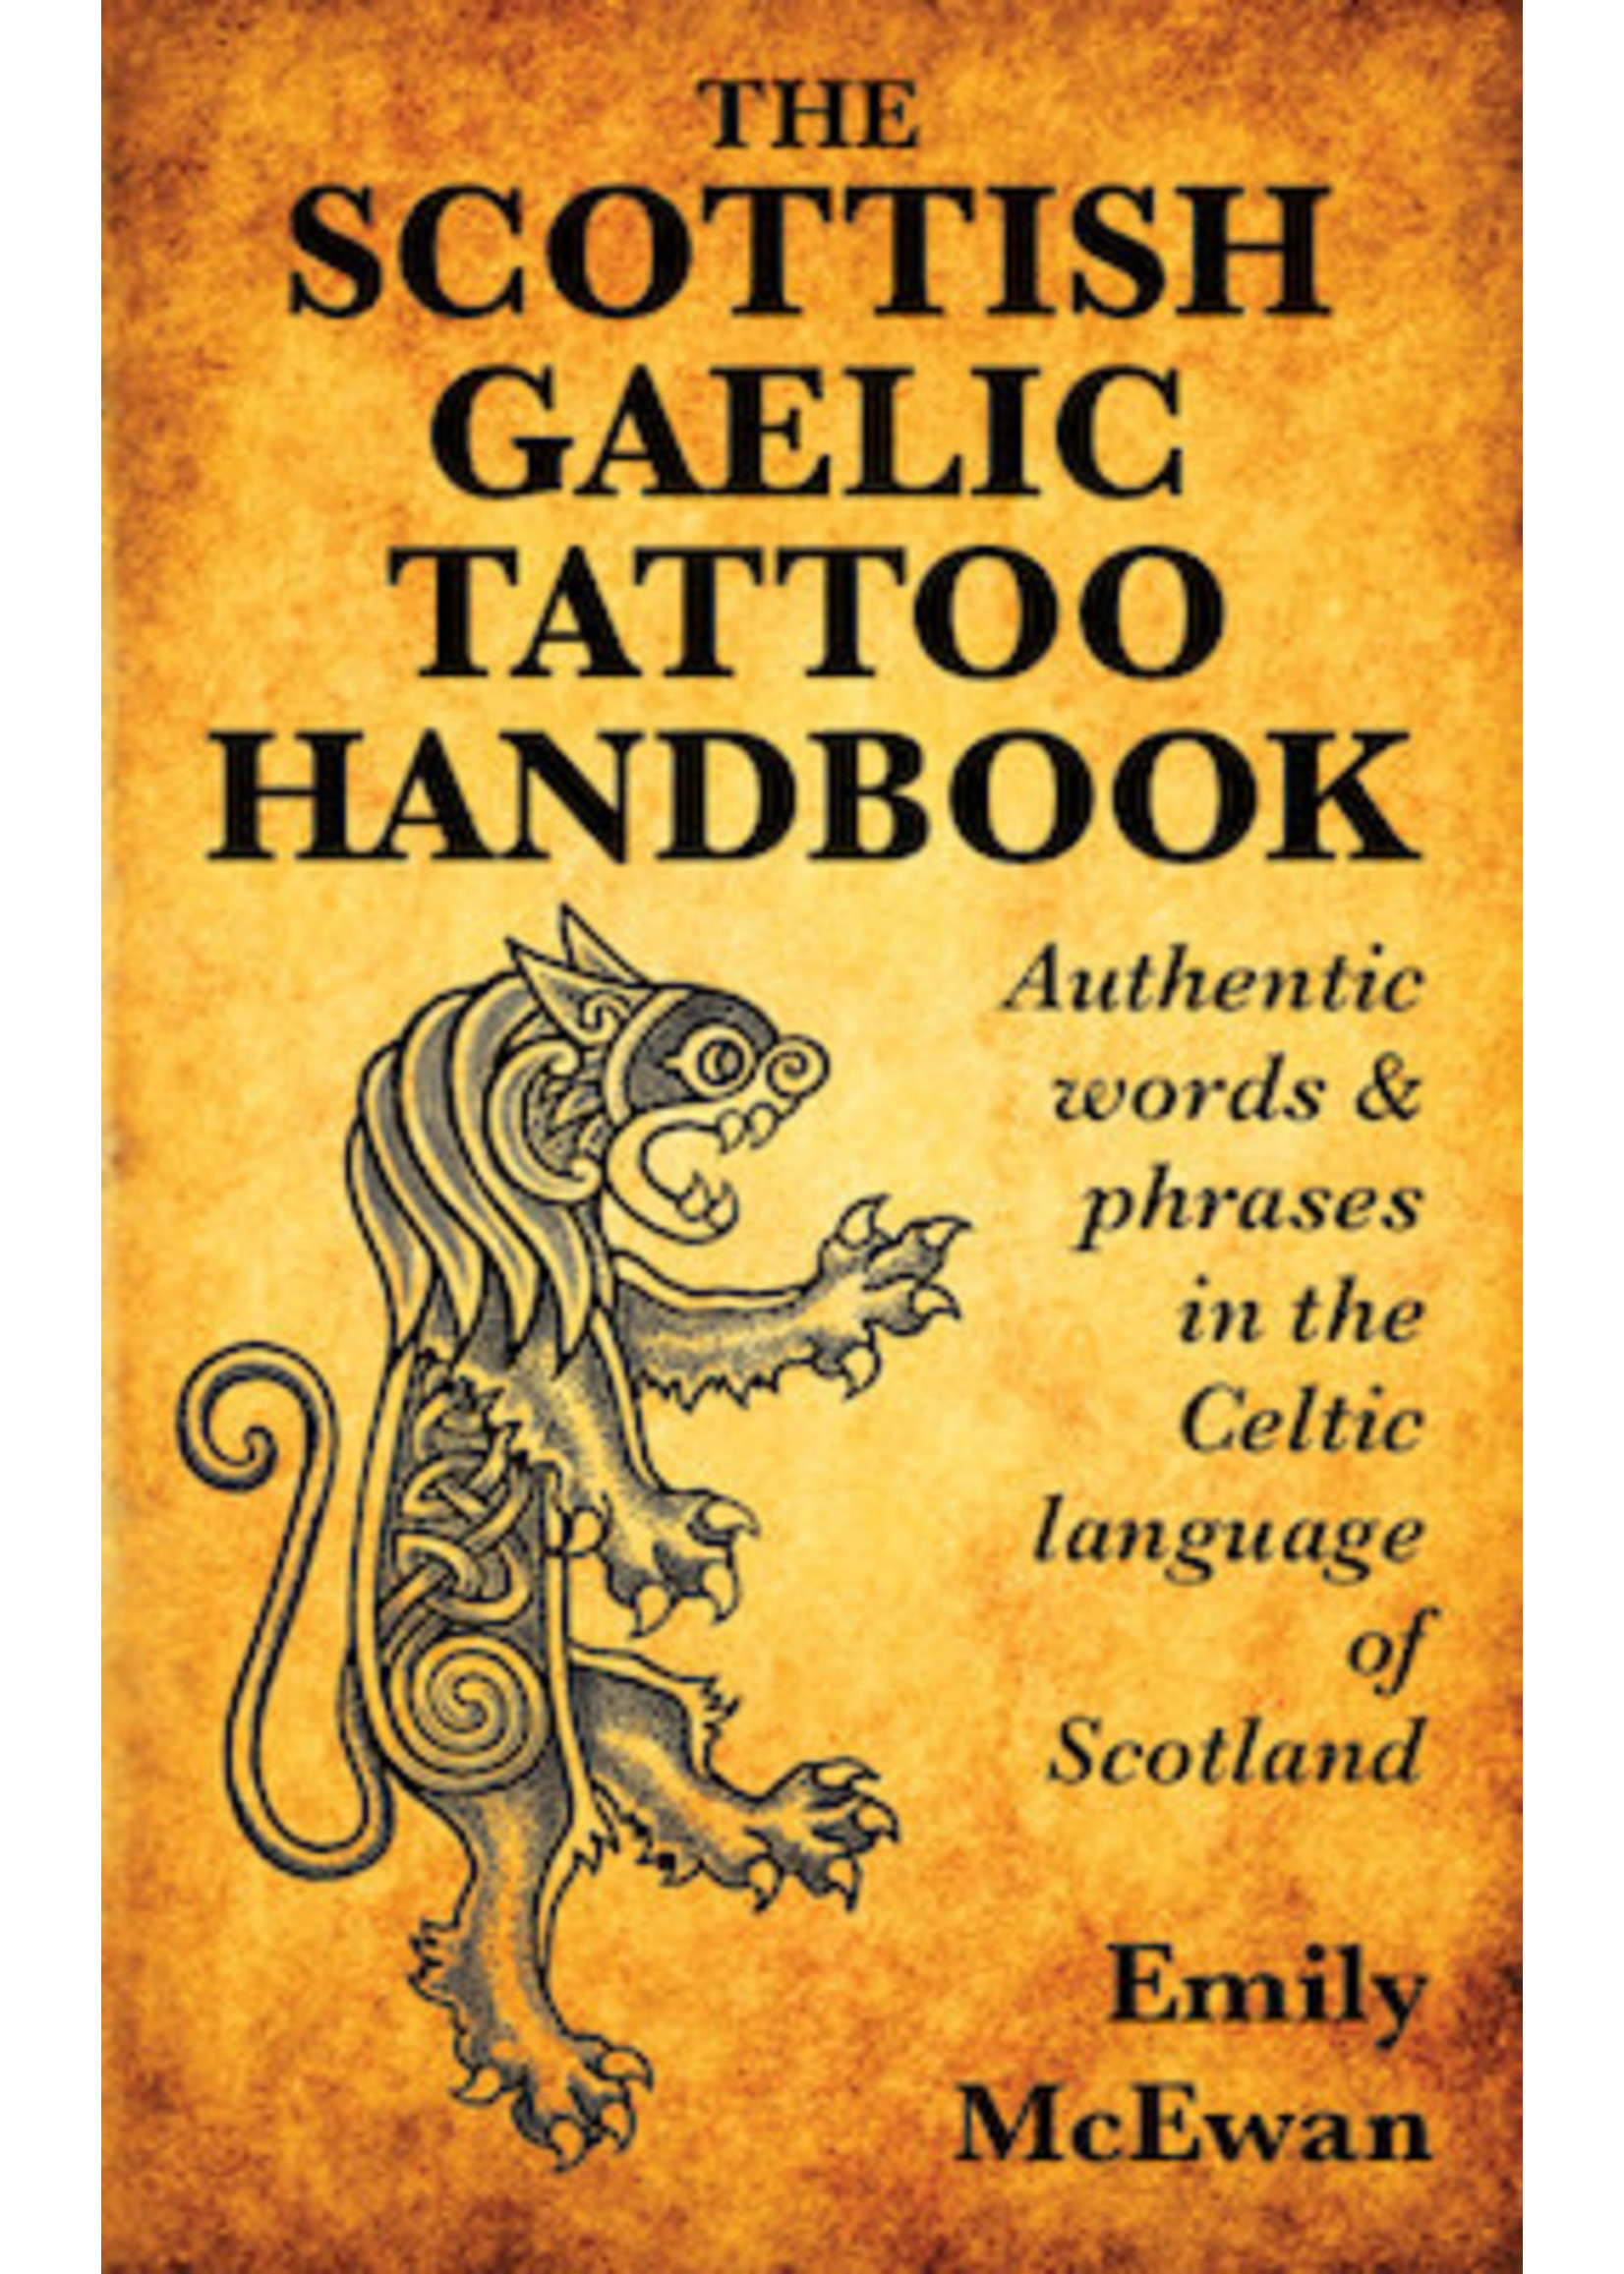 The Scottish Gaelic Tattoo Handbook: Authentic words and phrases in the Celtic language of Scotland by Emily McEwan